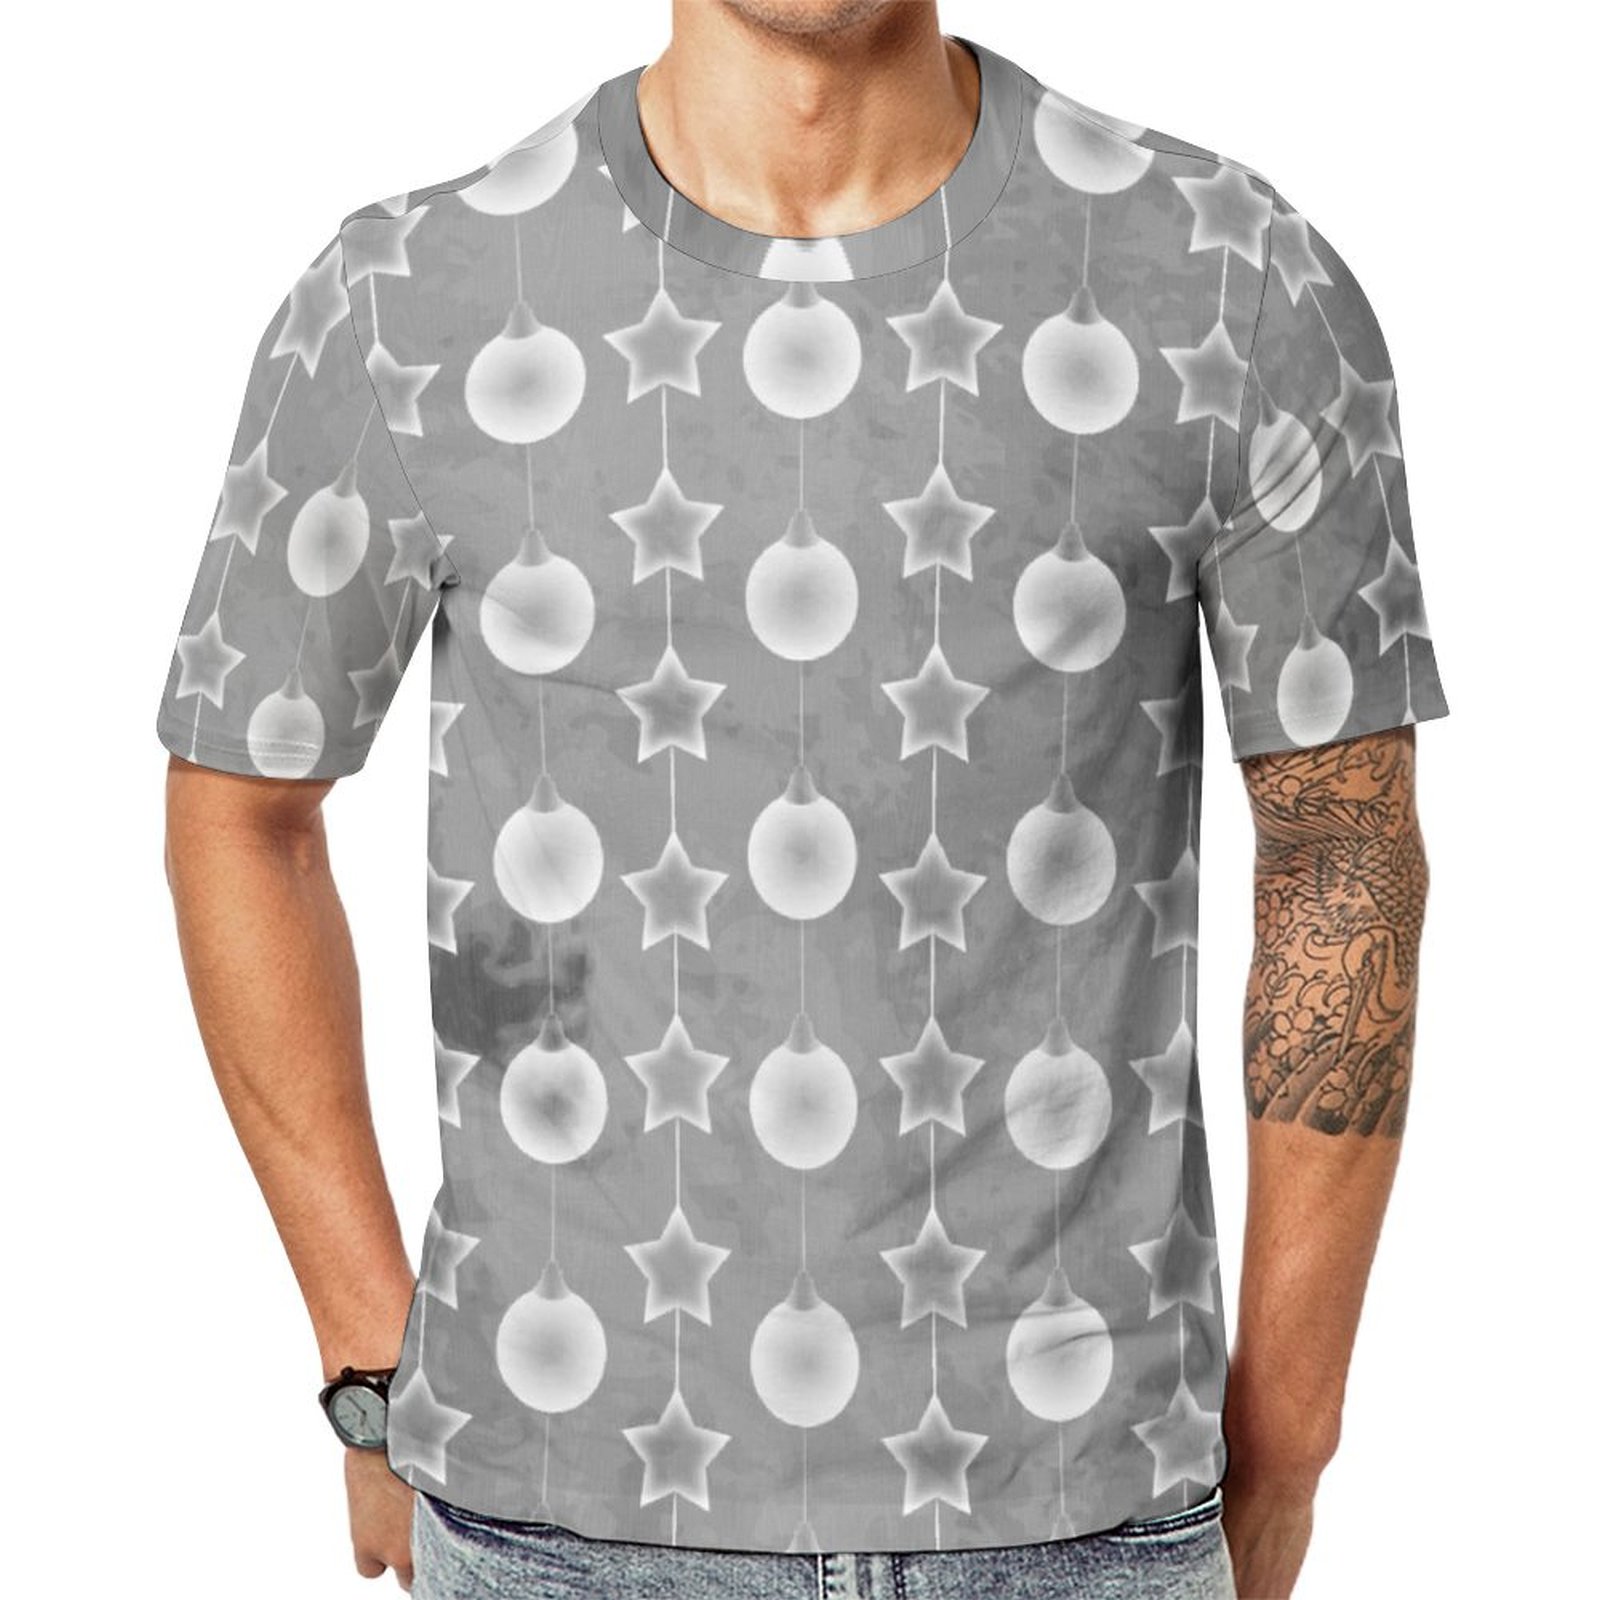 Gray And White Star Bauble Short Sleeve Print Unisex Tshirt Summer Casual Tees for Men and Women Coolcoshirts